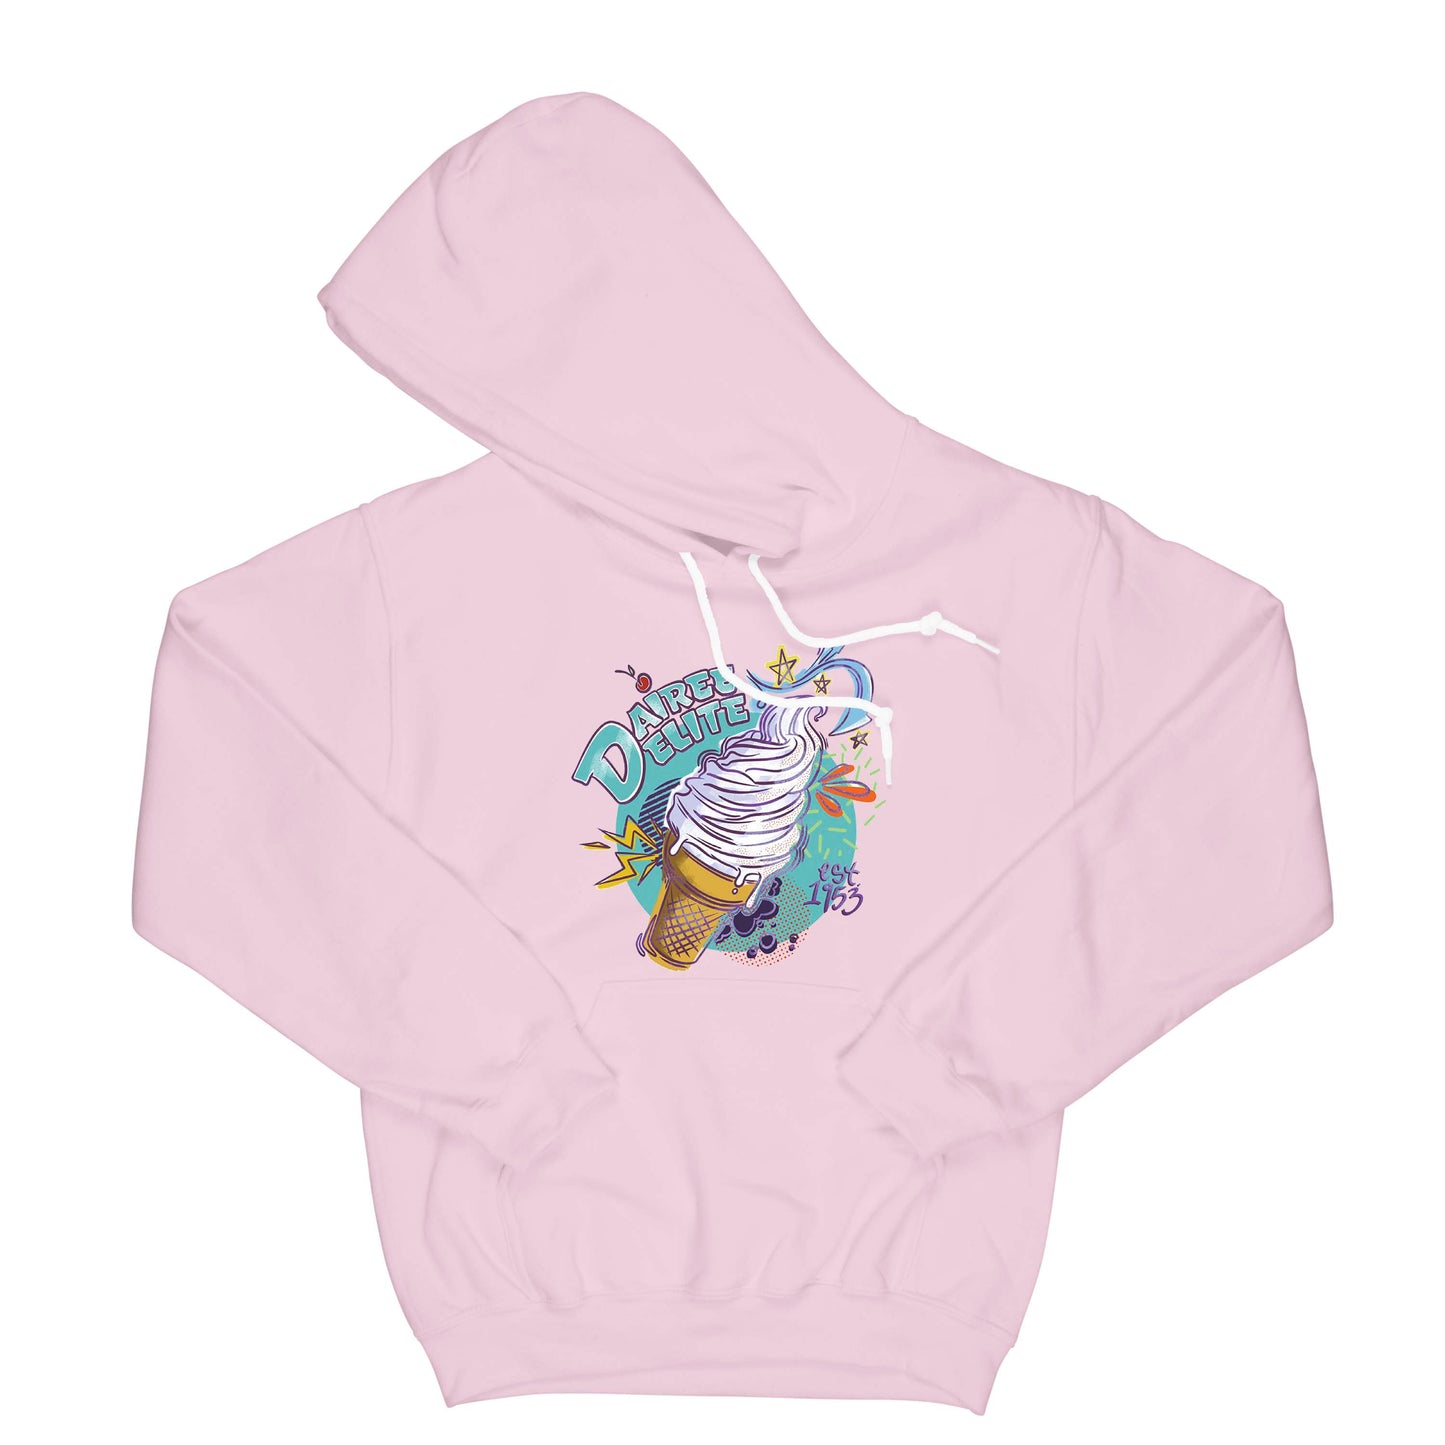 Dairee Delite 70th Anniversary Cone Hoodie Small Light Pink